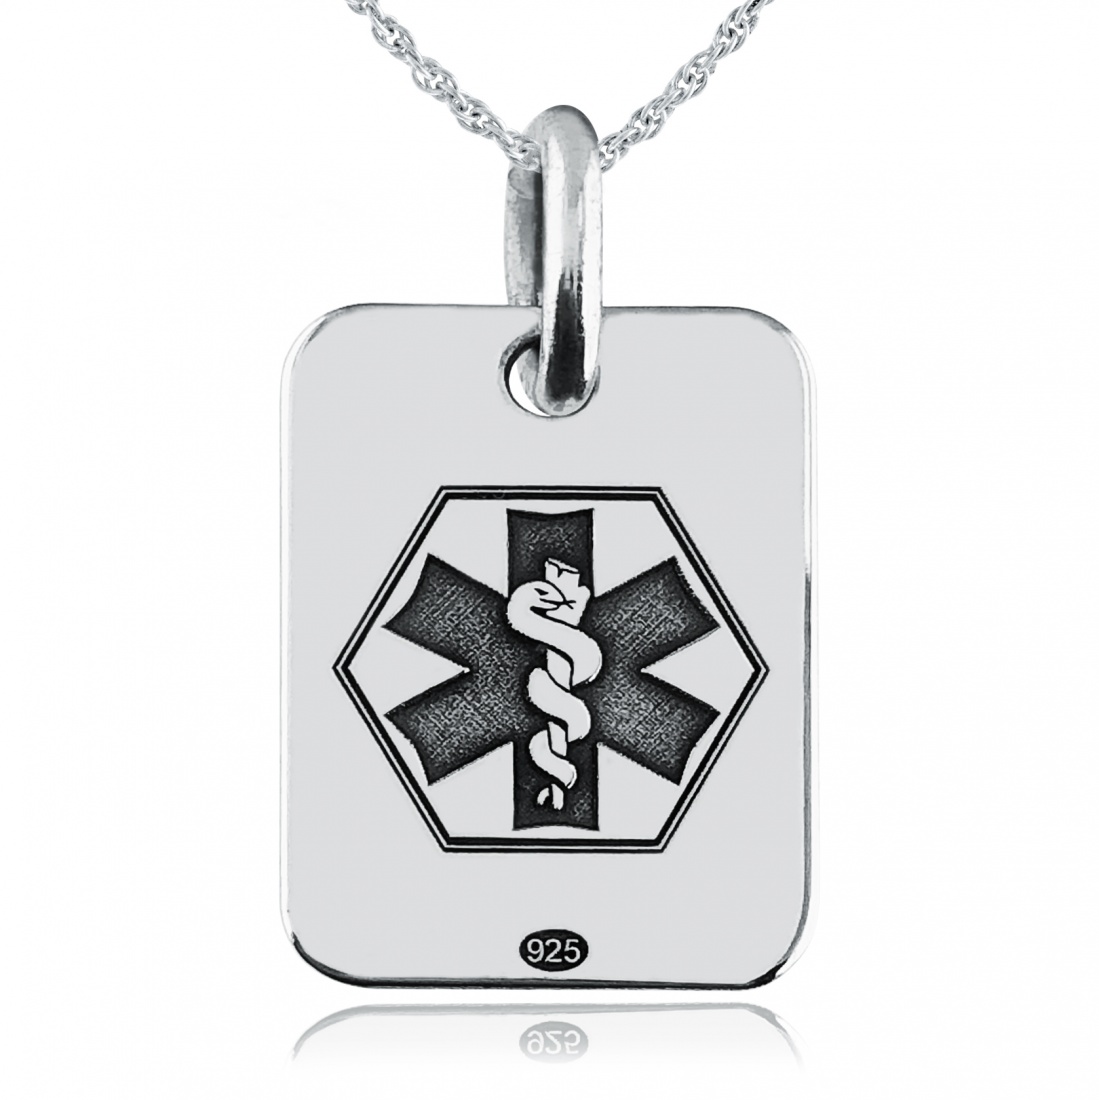 Child's Medical Alert Dog Tag, Personalised, Sterling Silver